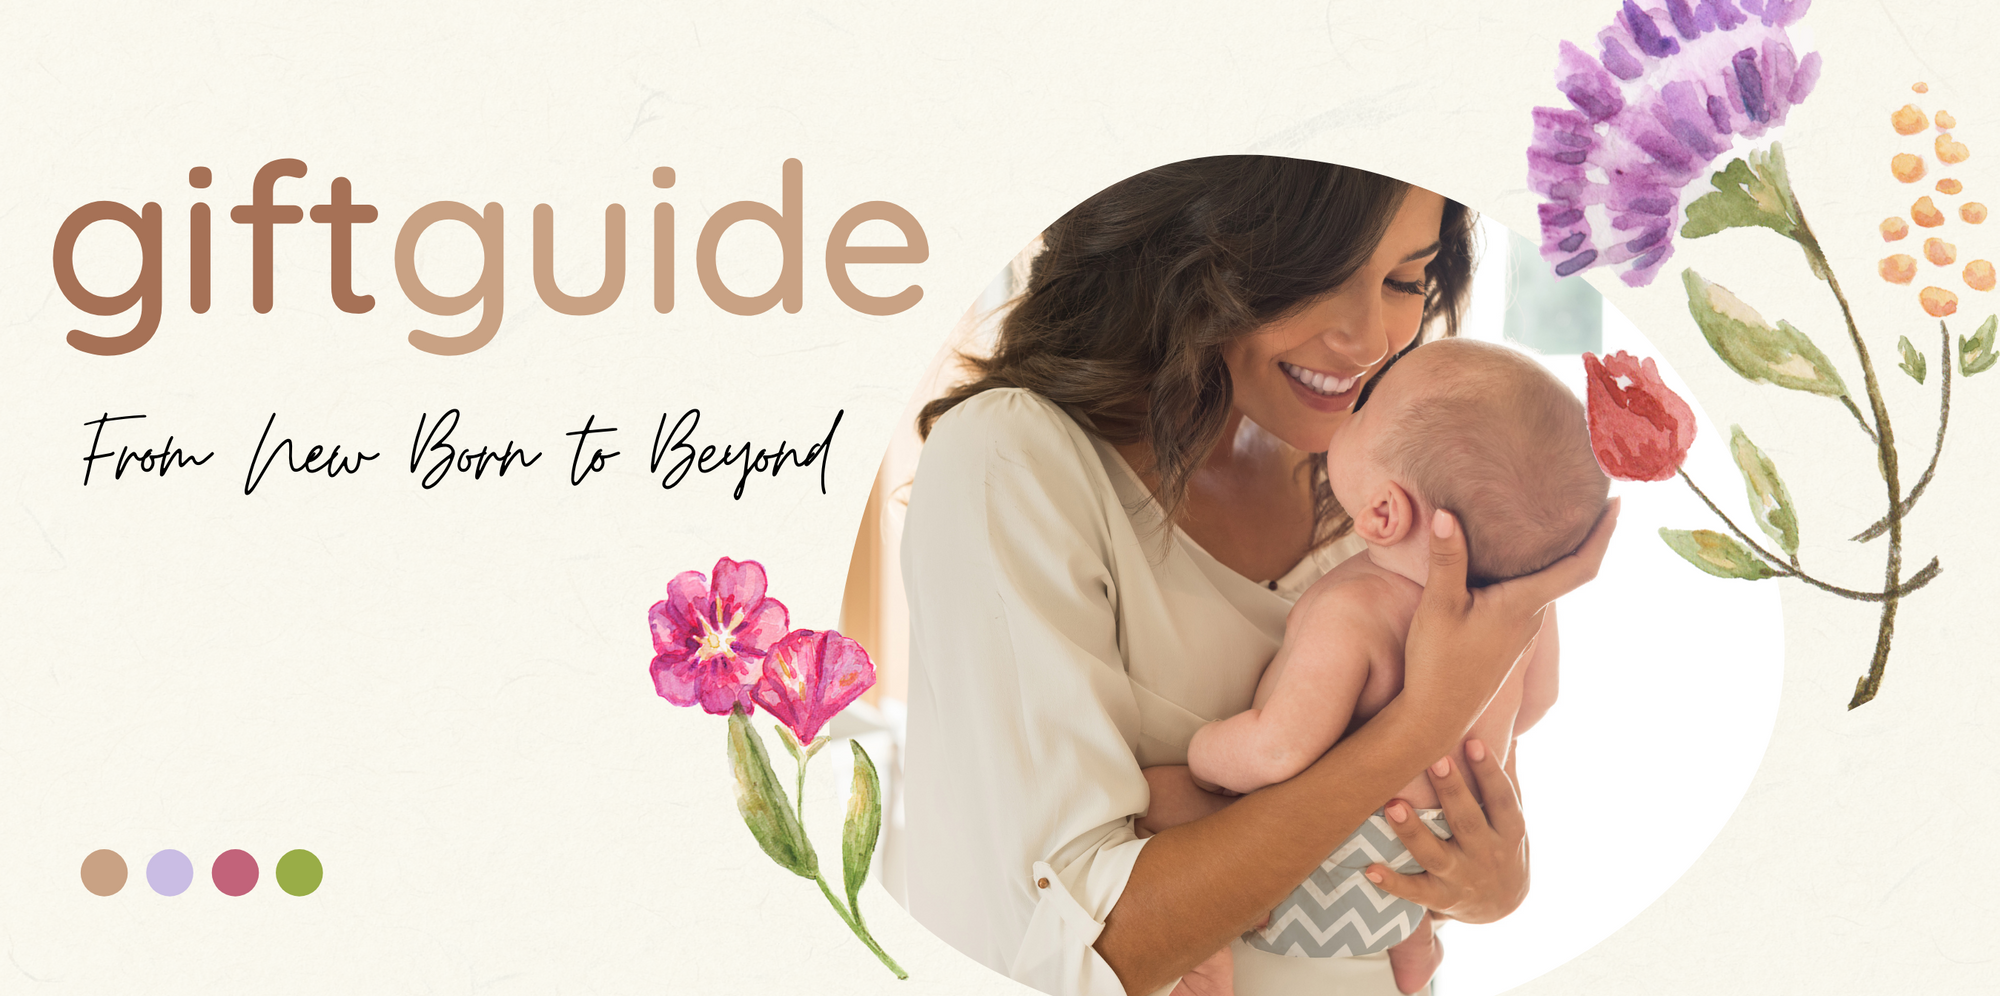 Ultimate Baby Gift Guide | From New Born to Beyond by Heather Spears